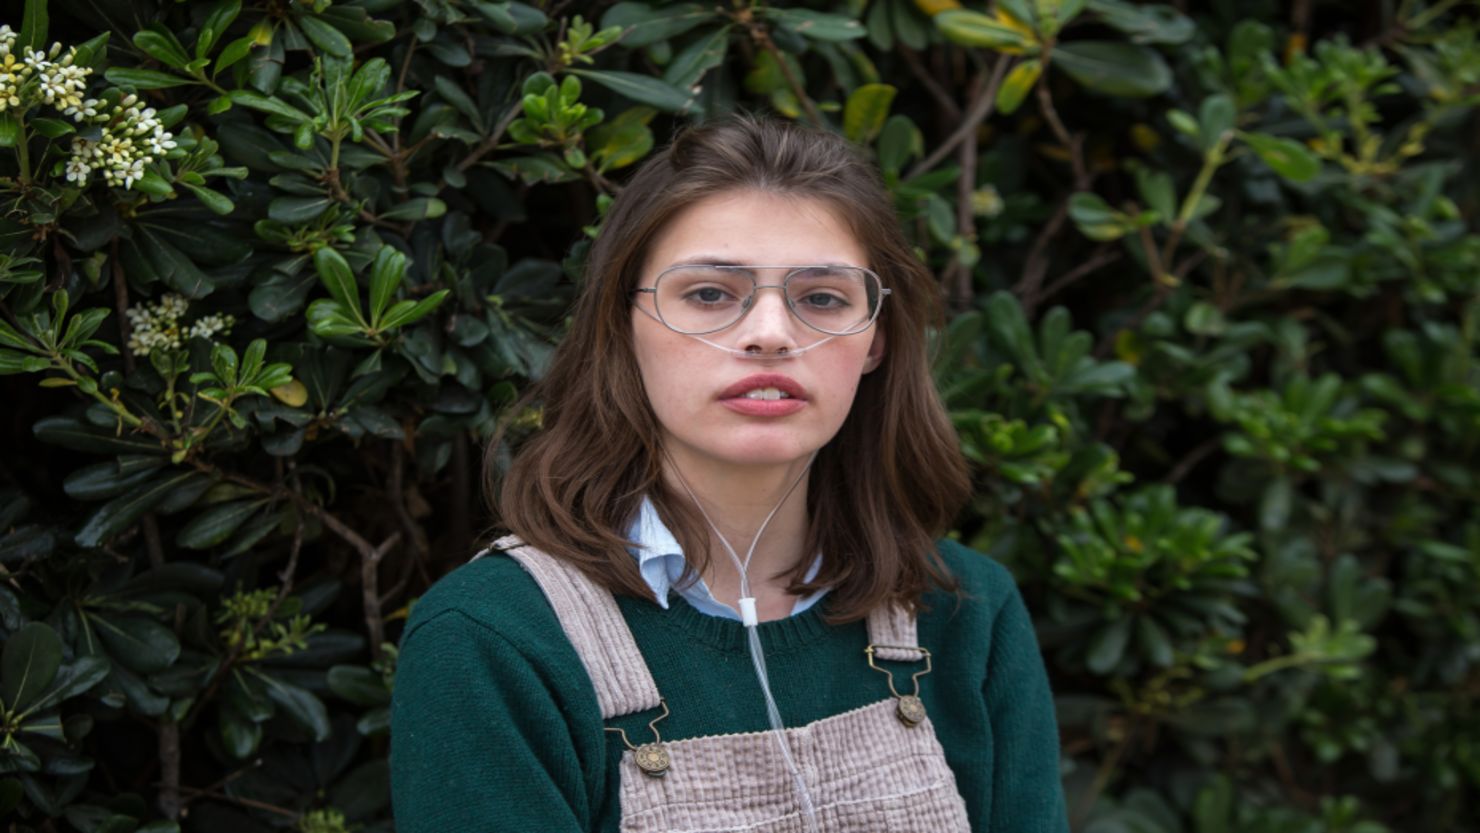 Claire Wineland vowed that she wouldn't have a lung transplant, but her decline from cystic fibrosis made her reconsider. 